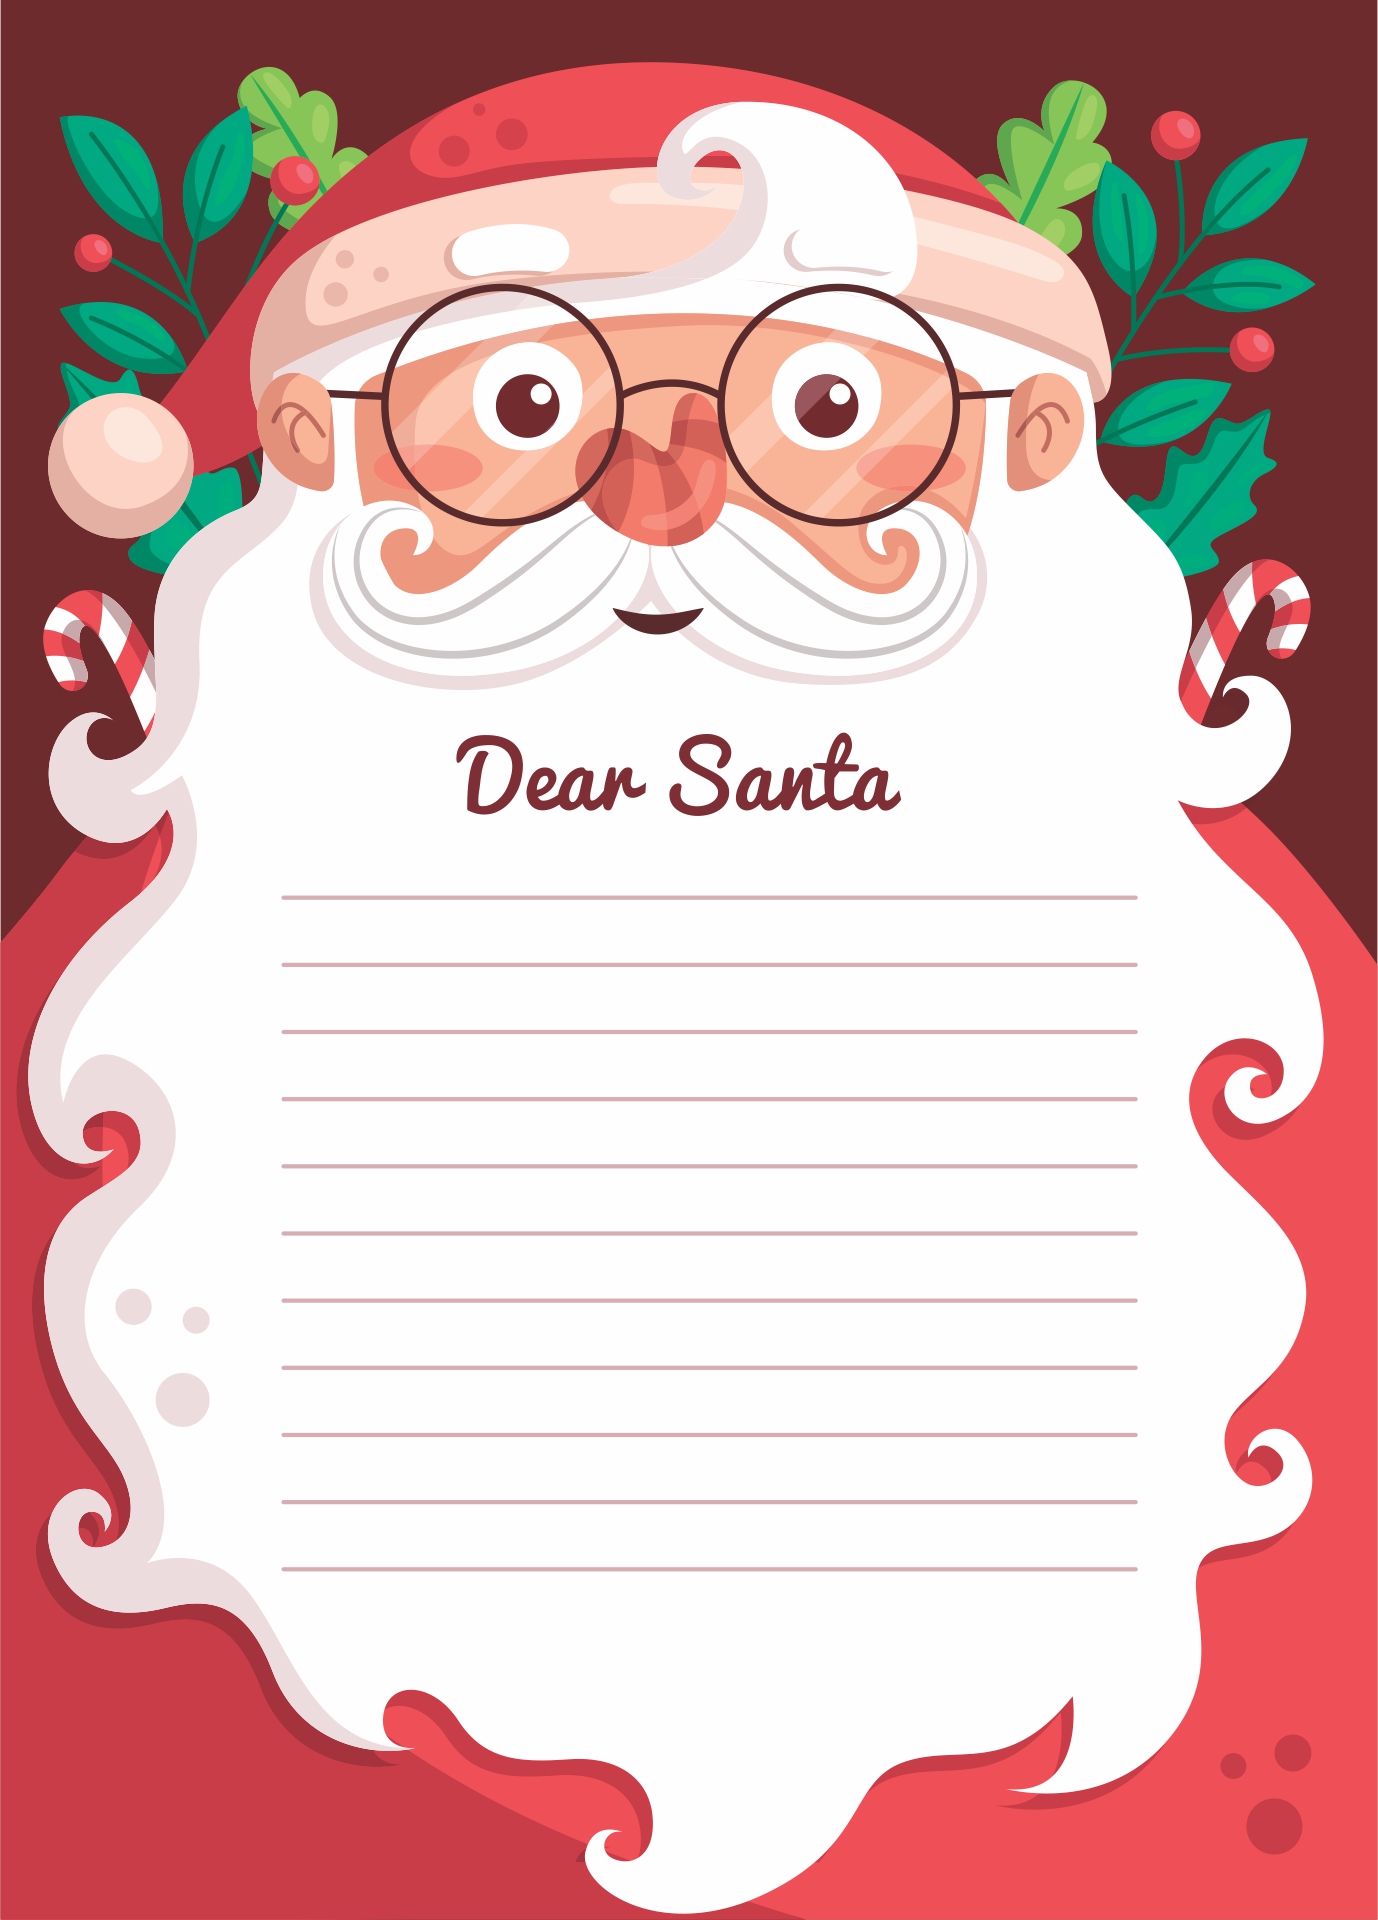 Santa Claus Letter Printable Simply Edit, Print, And Put It In An ...